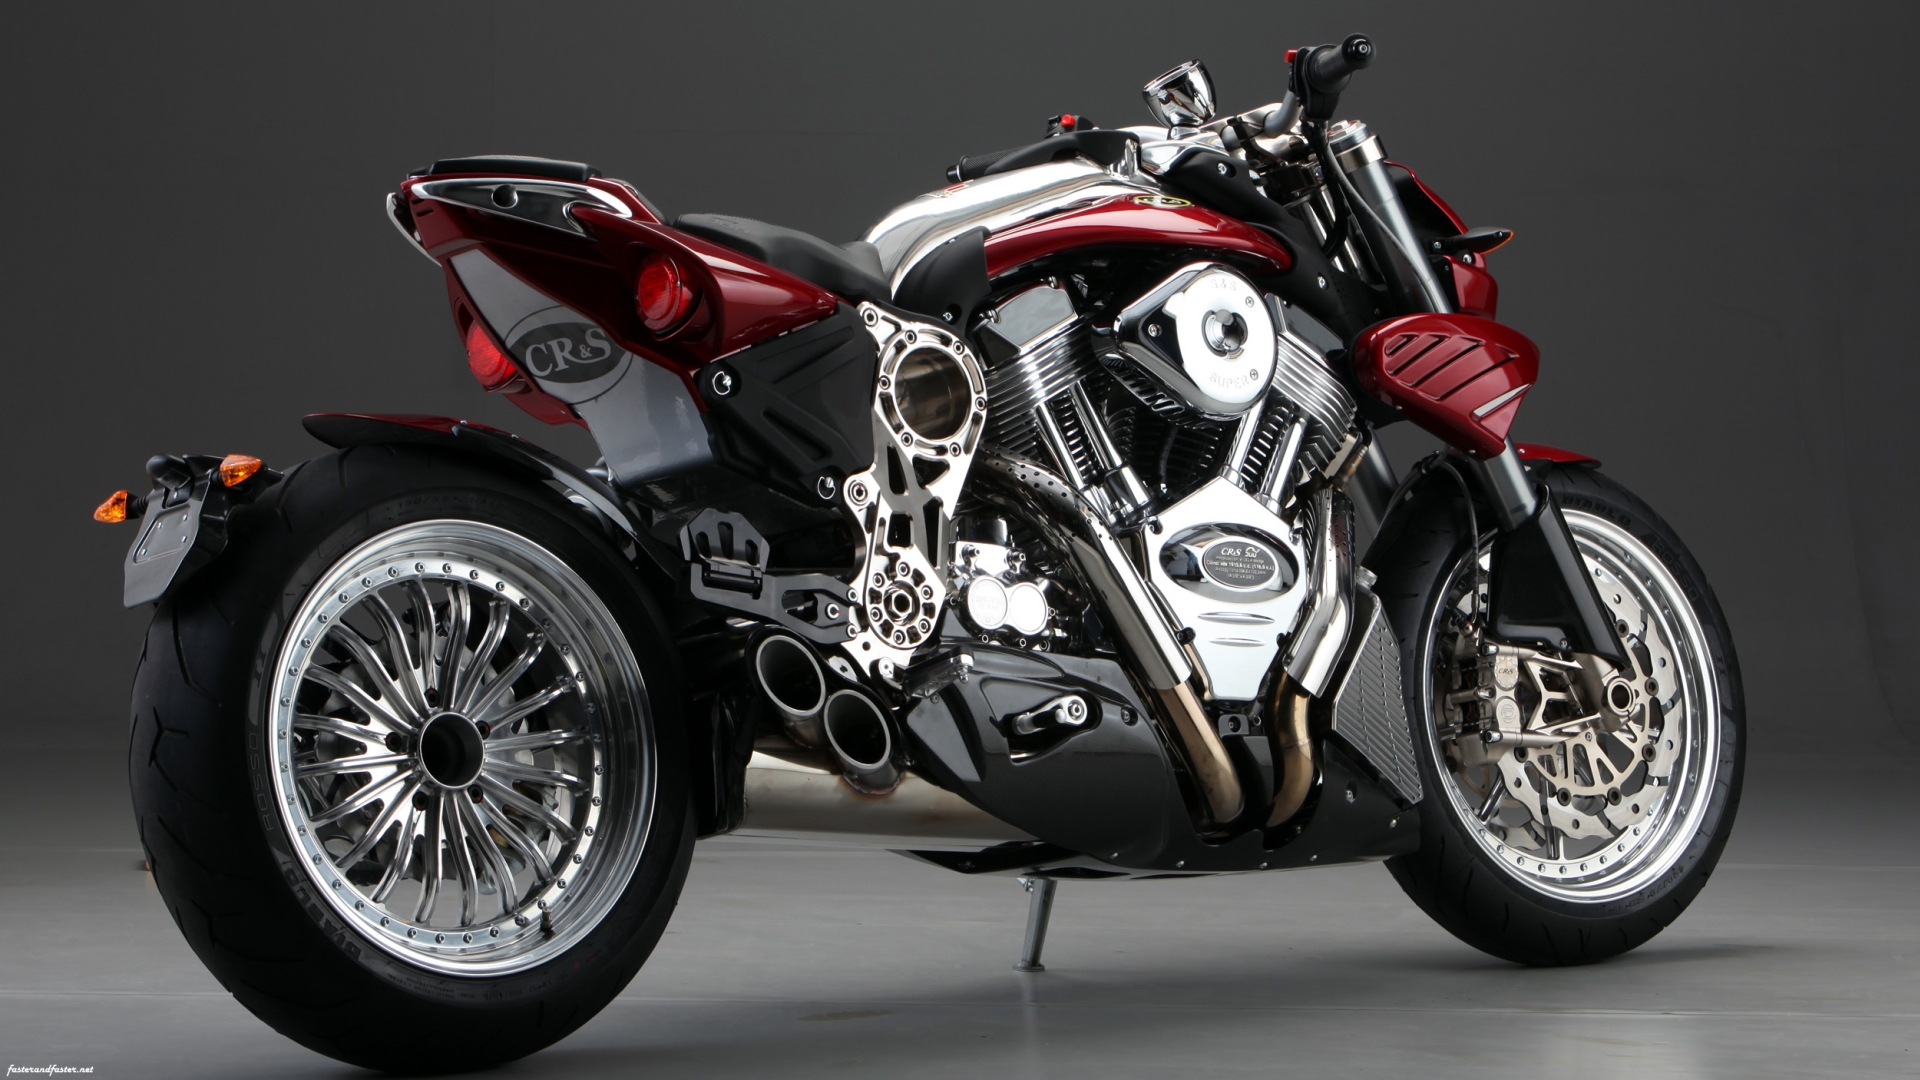 CR&S' Duu Motorcycles Are Awesome and Expensive - autoevolution